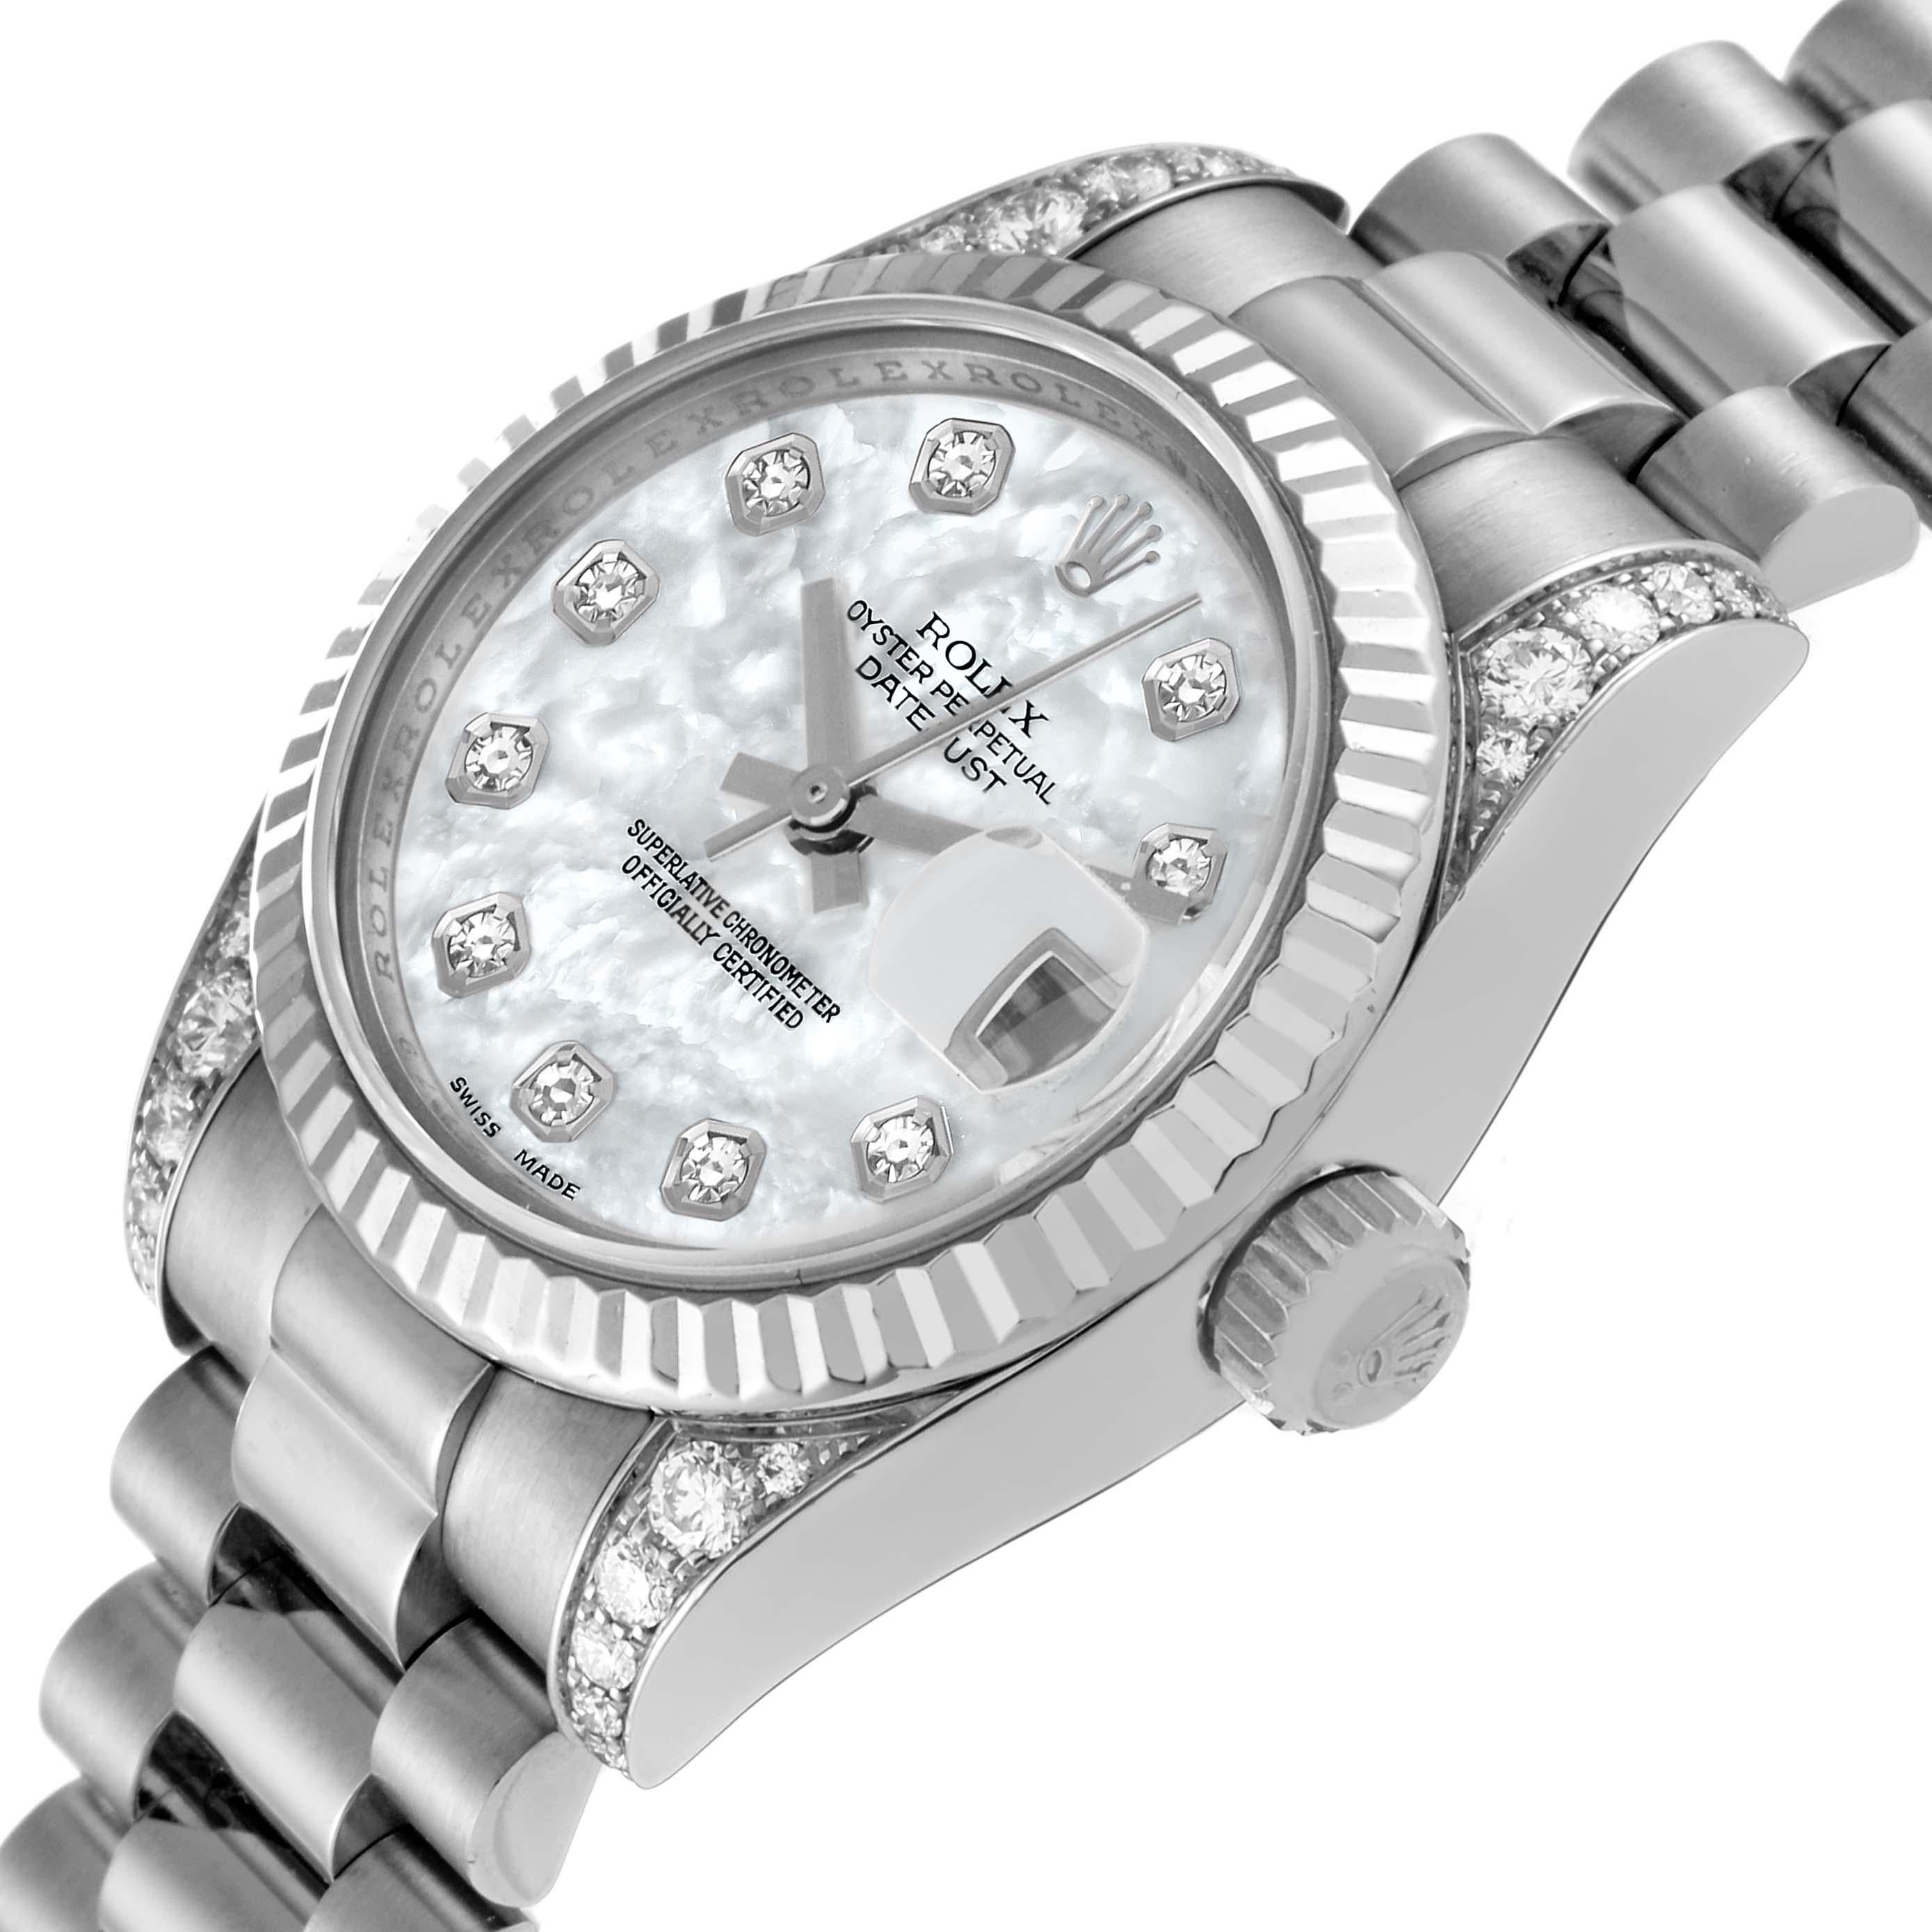 Rolex Datejust President White Gold MOP Dial Diamond Ladies Watch 179159 In Excellent Condition For Sale In Atlanta, GA